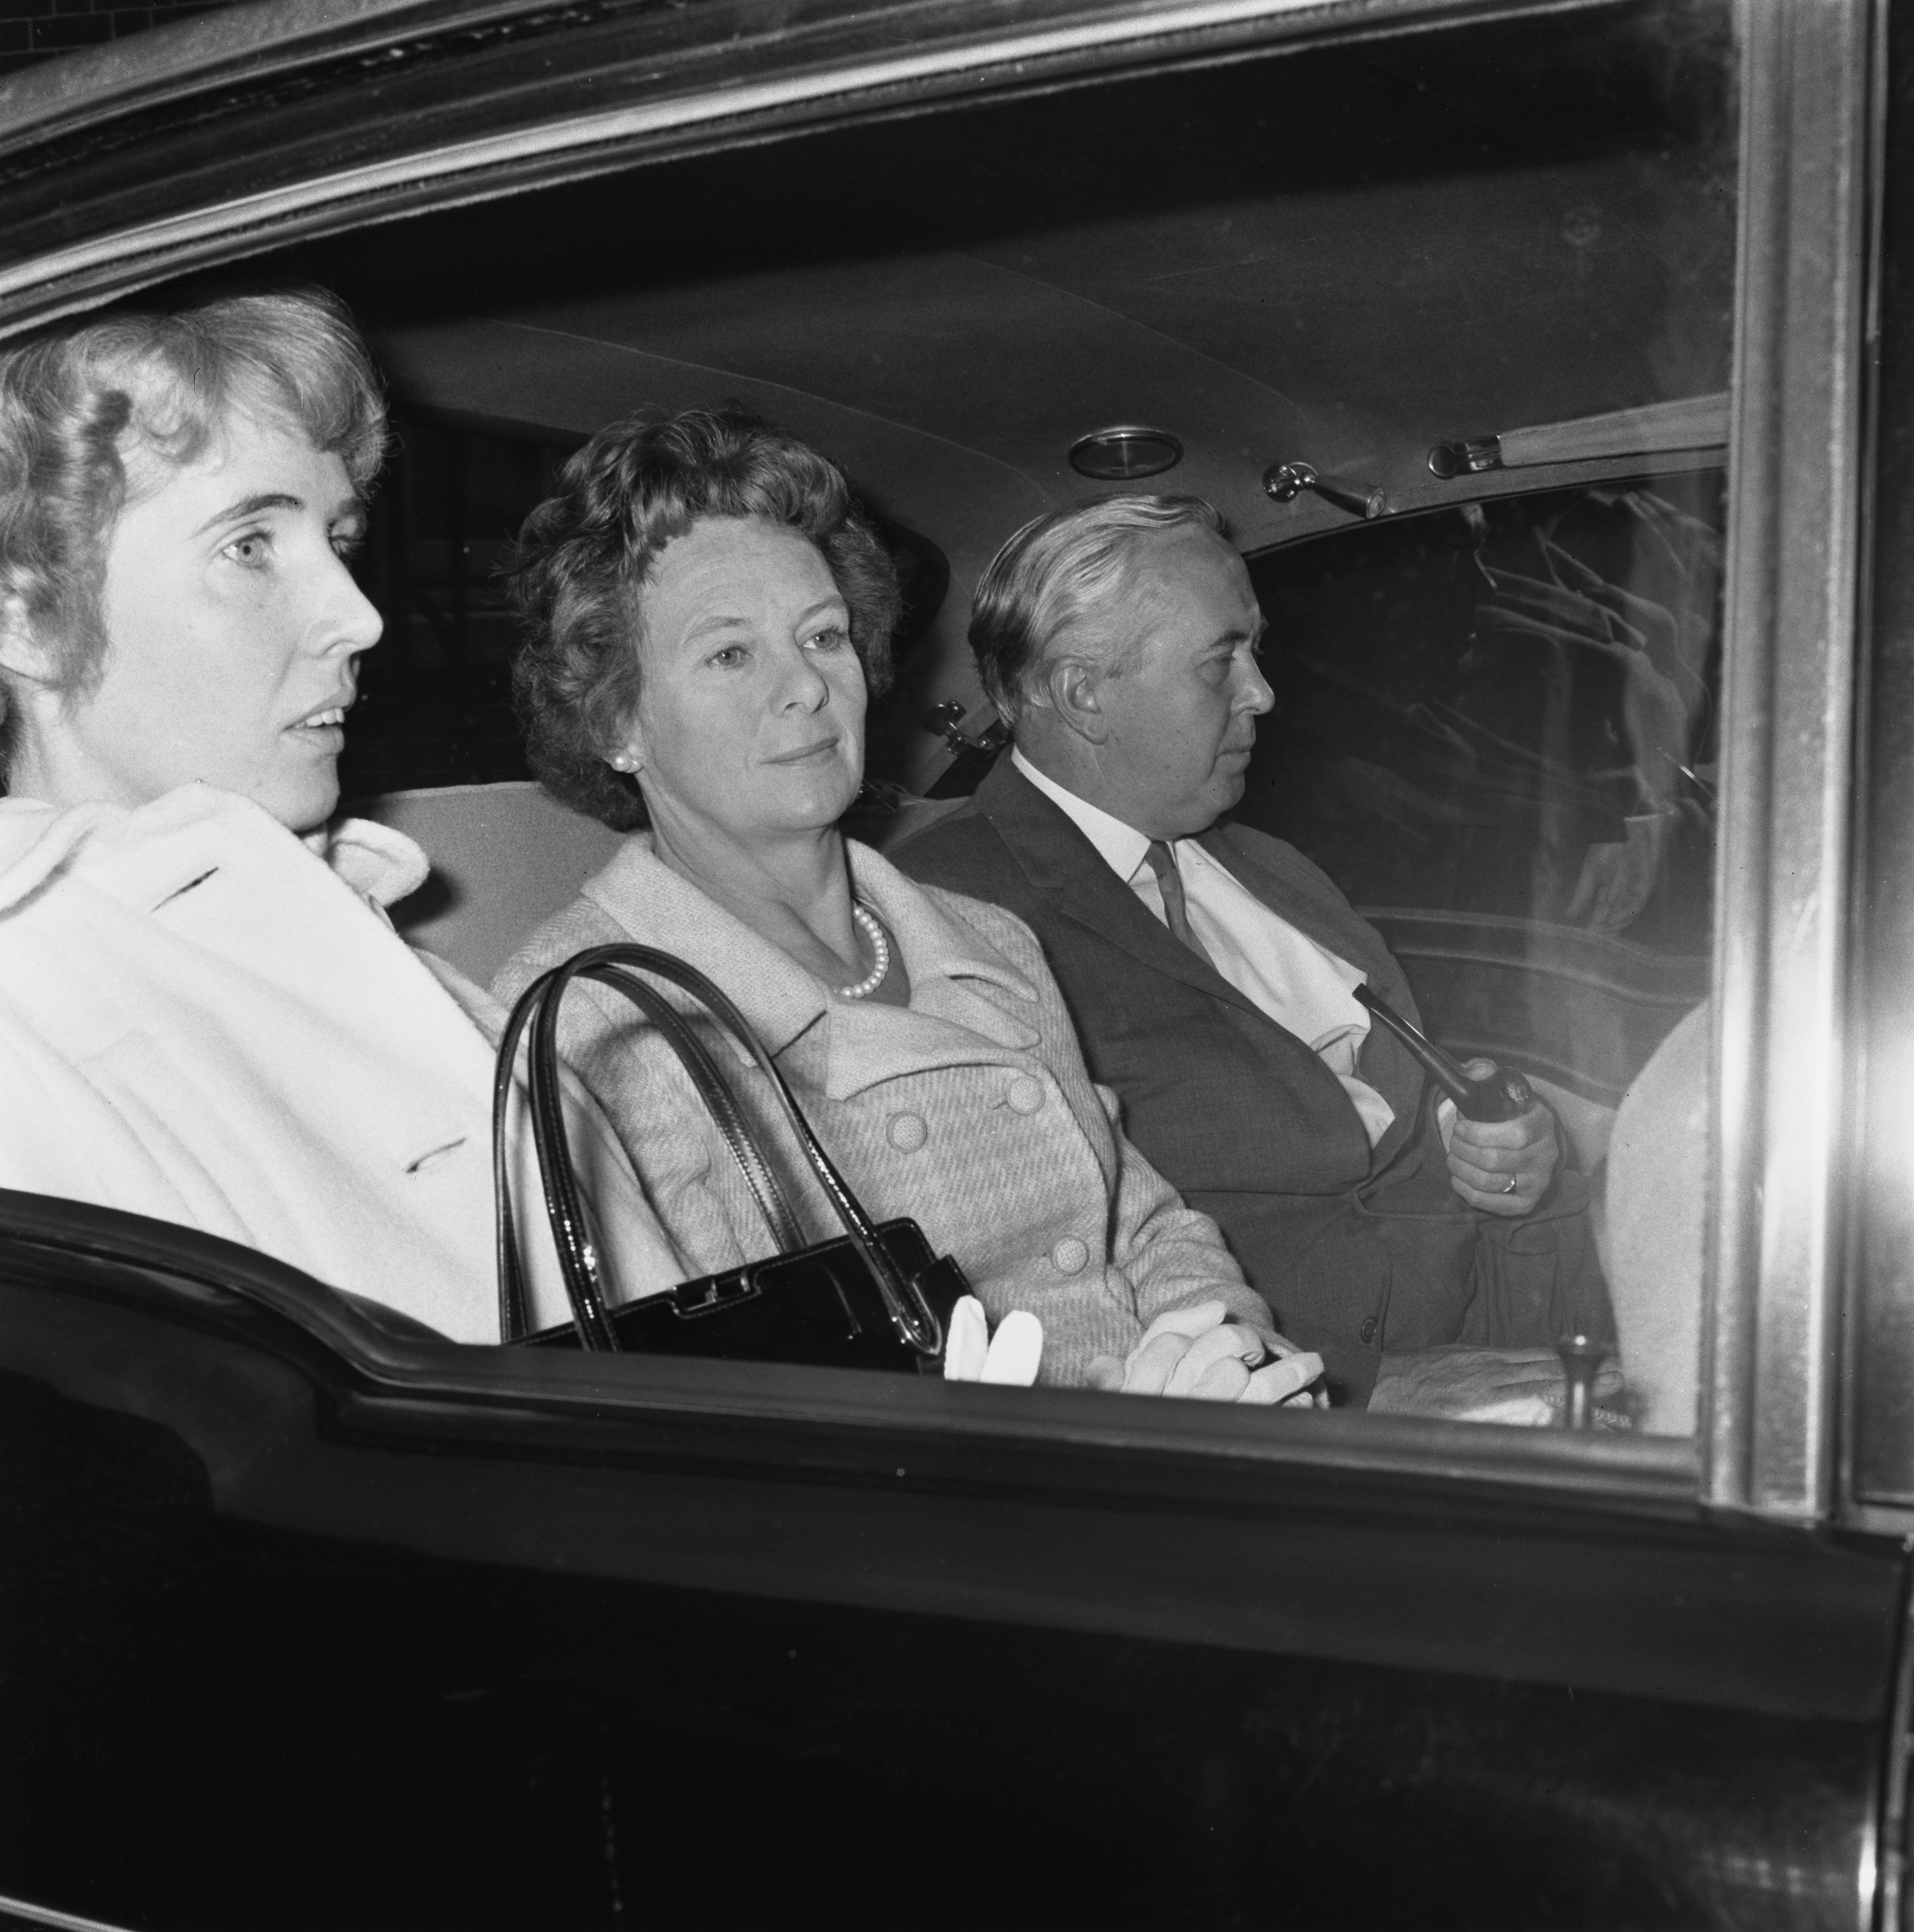 Prime minister Harold Wilson with his wife Mary and secretary Marcia Williams, later Baroness Falkender, with whom he had an affair in the Fifties. A second affair during his time in Downing Street has now come to light